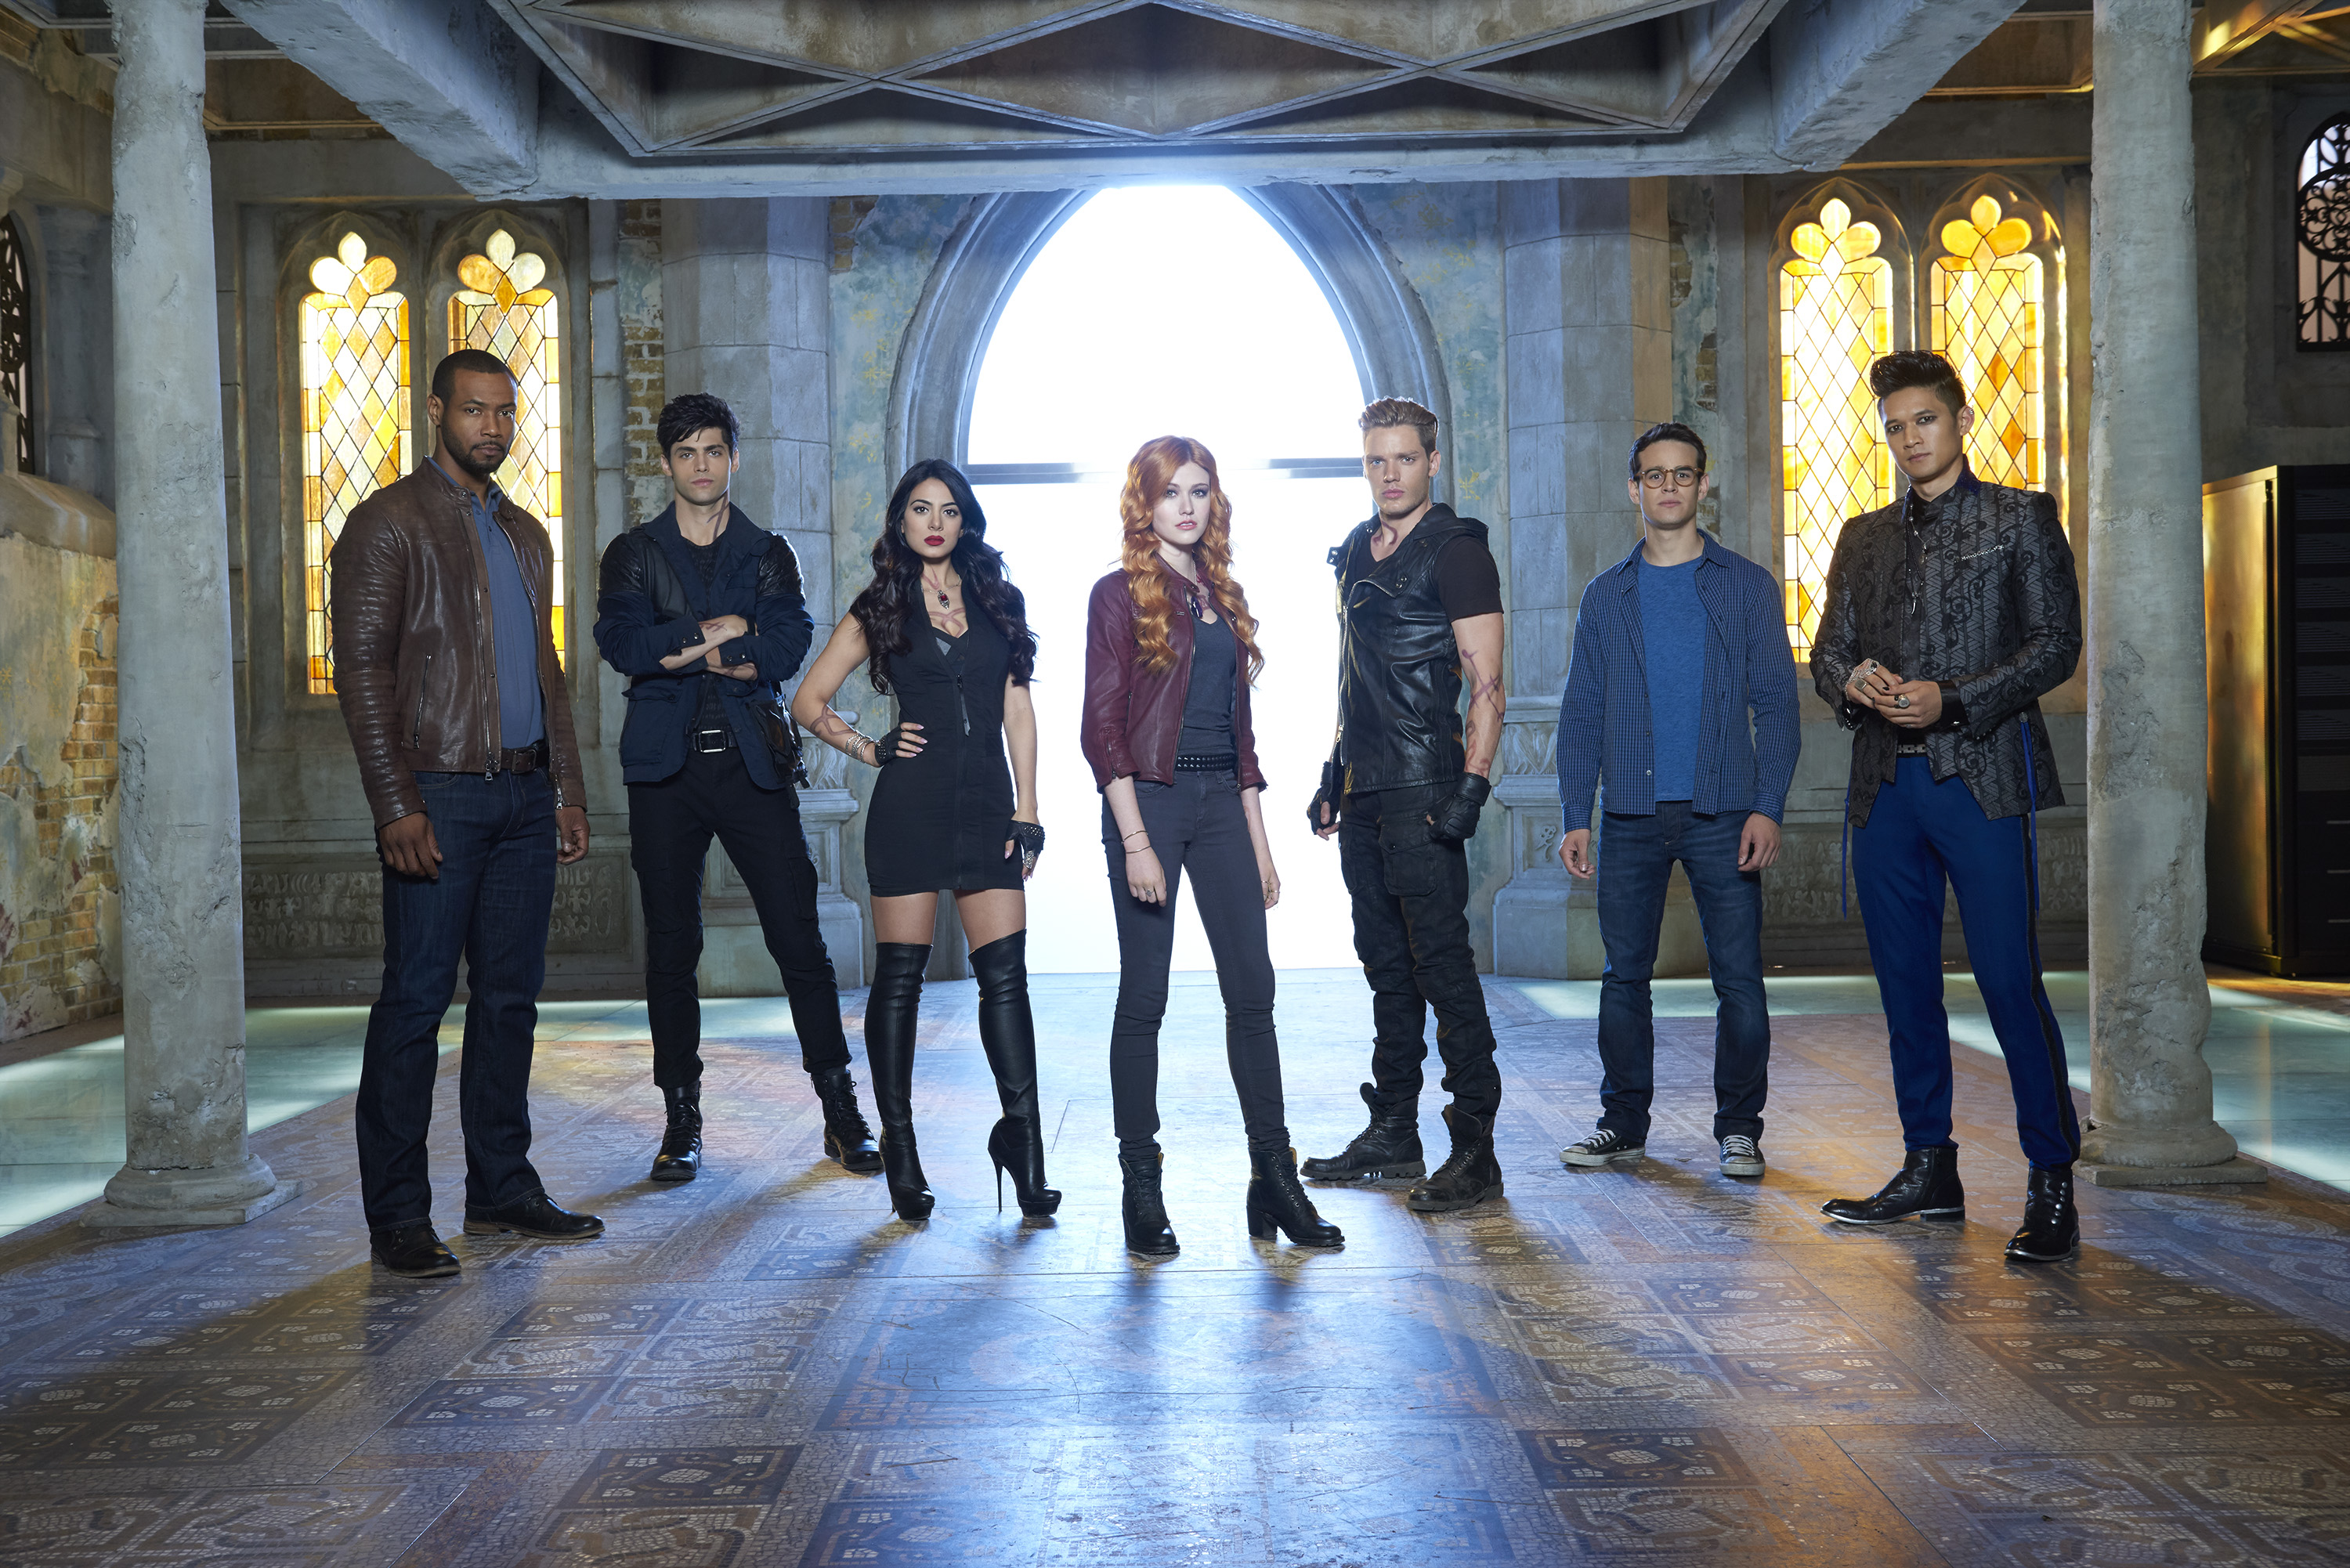 shadowhunters-new-season-1-cast-gallery-images